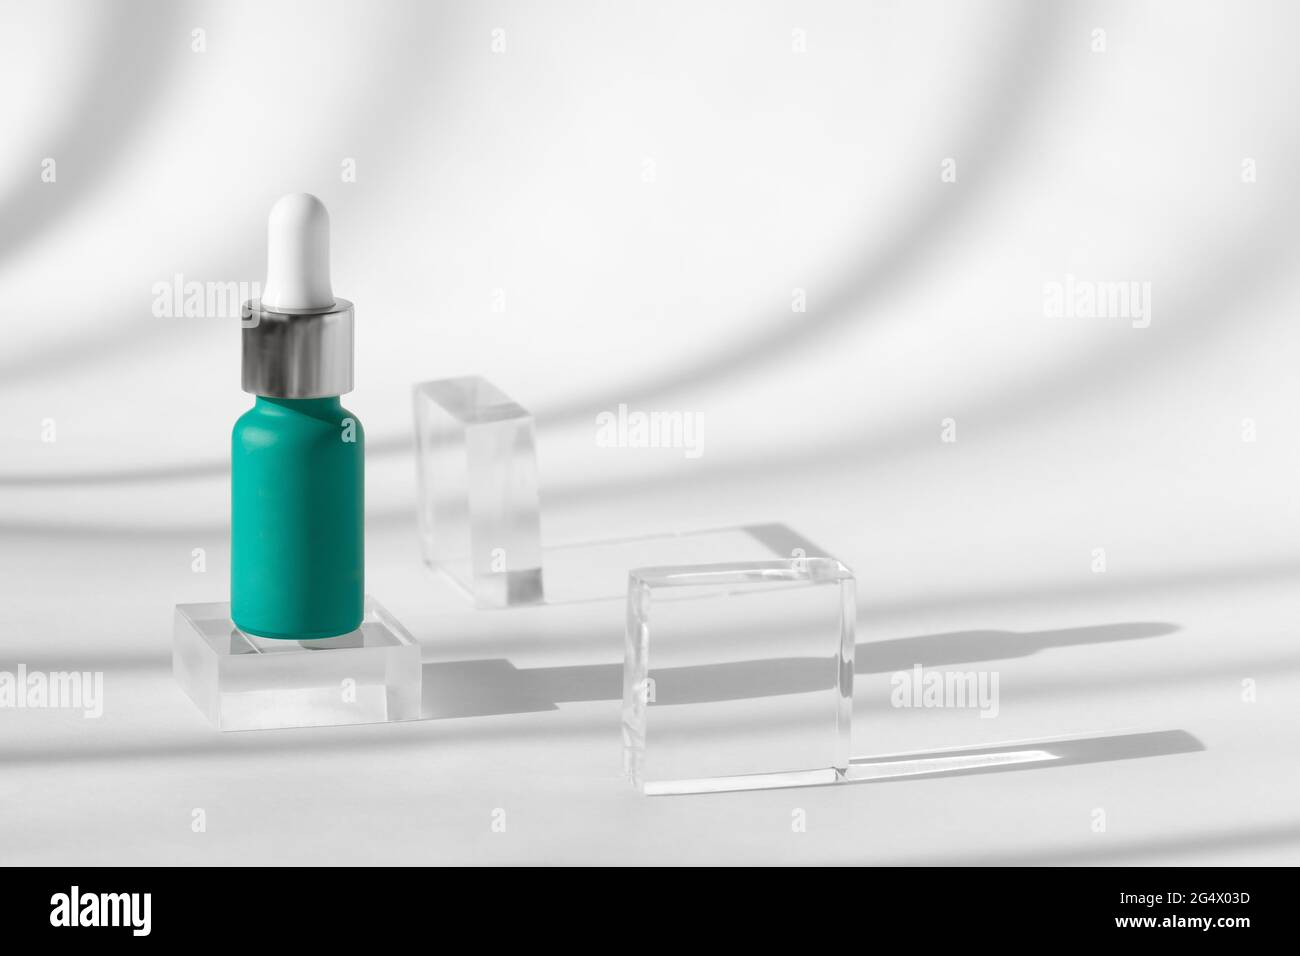 Serum skin care product on background with shadows, hyaluronic acid oil. Cosmetic serum liquid mockup in blue bottle, glass podium decor. Mock up Stock Photo